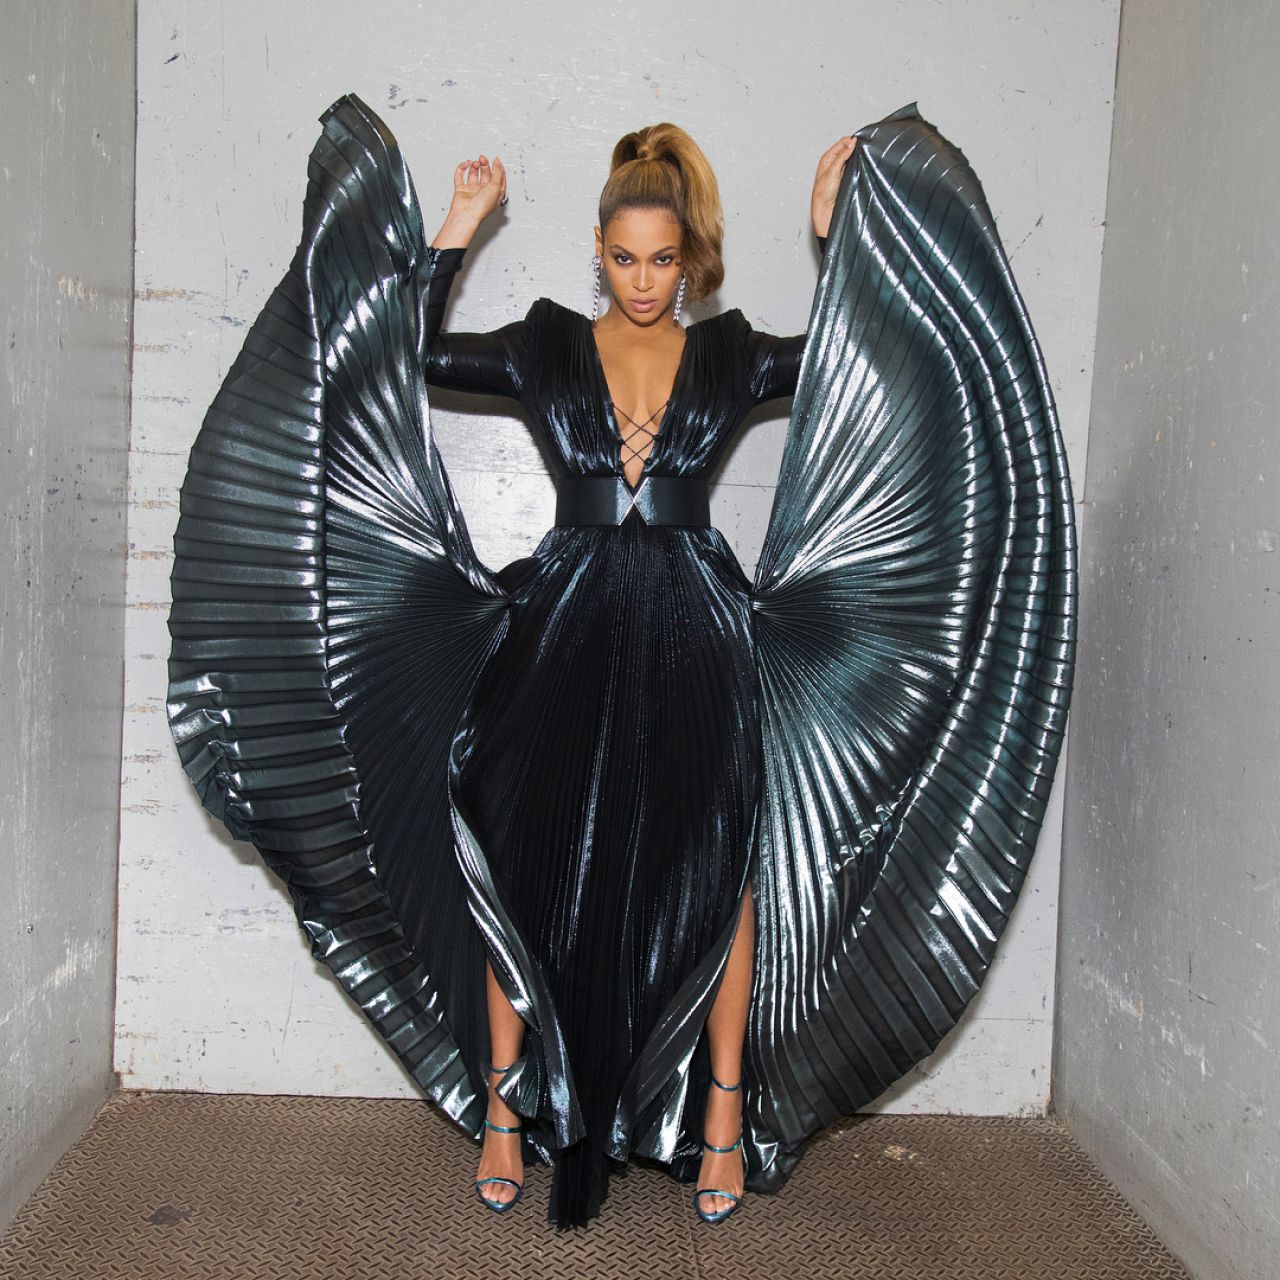 http://celebmafia.com/wp-content/uploads/2018/01/beyonce-photoshoot-before-attending-pre-grammy-2018-party-in-nyc-4.jpg